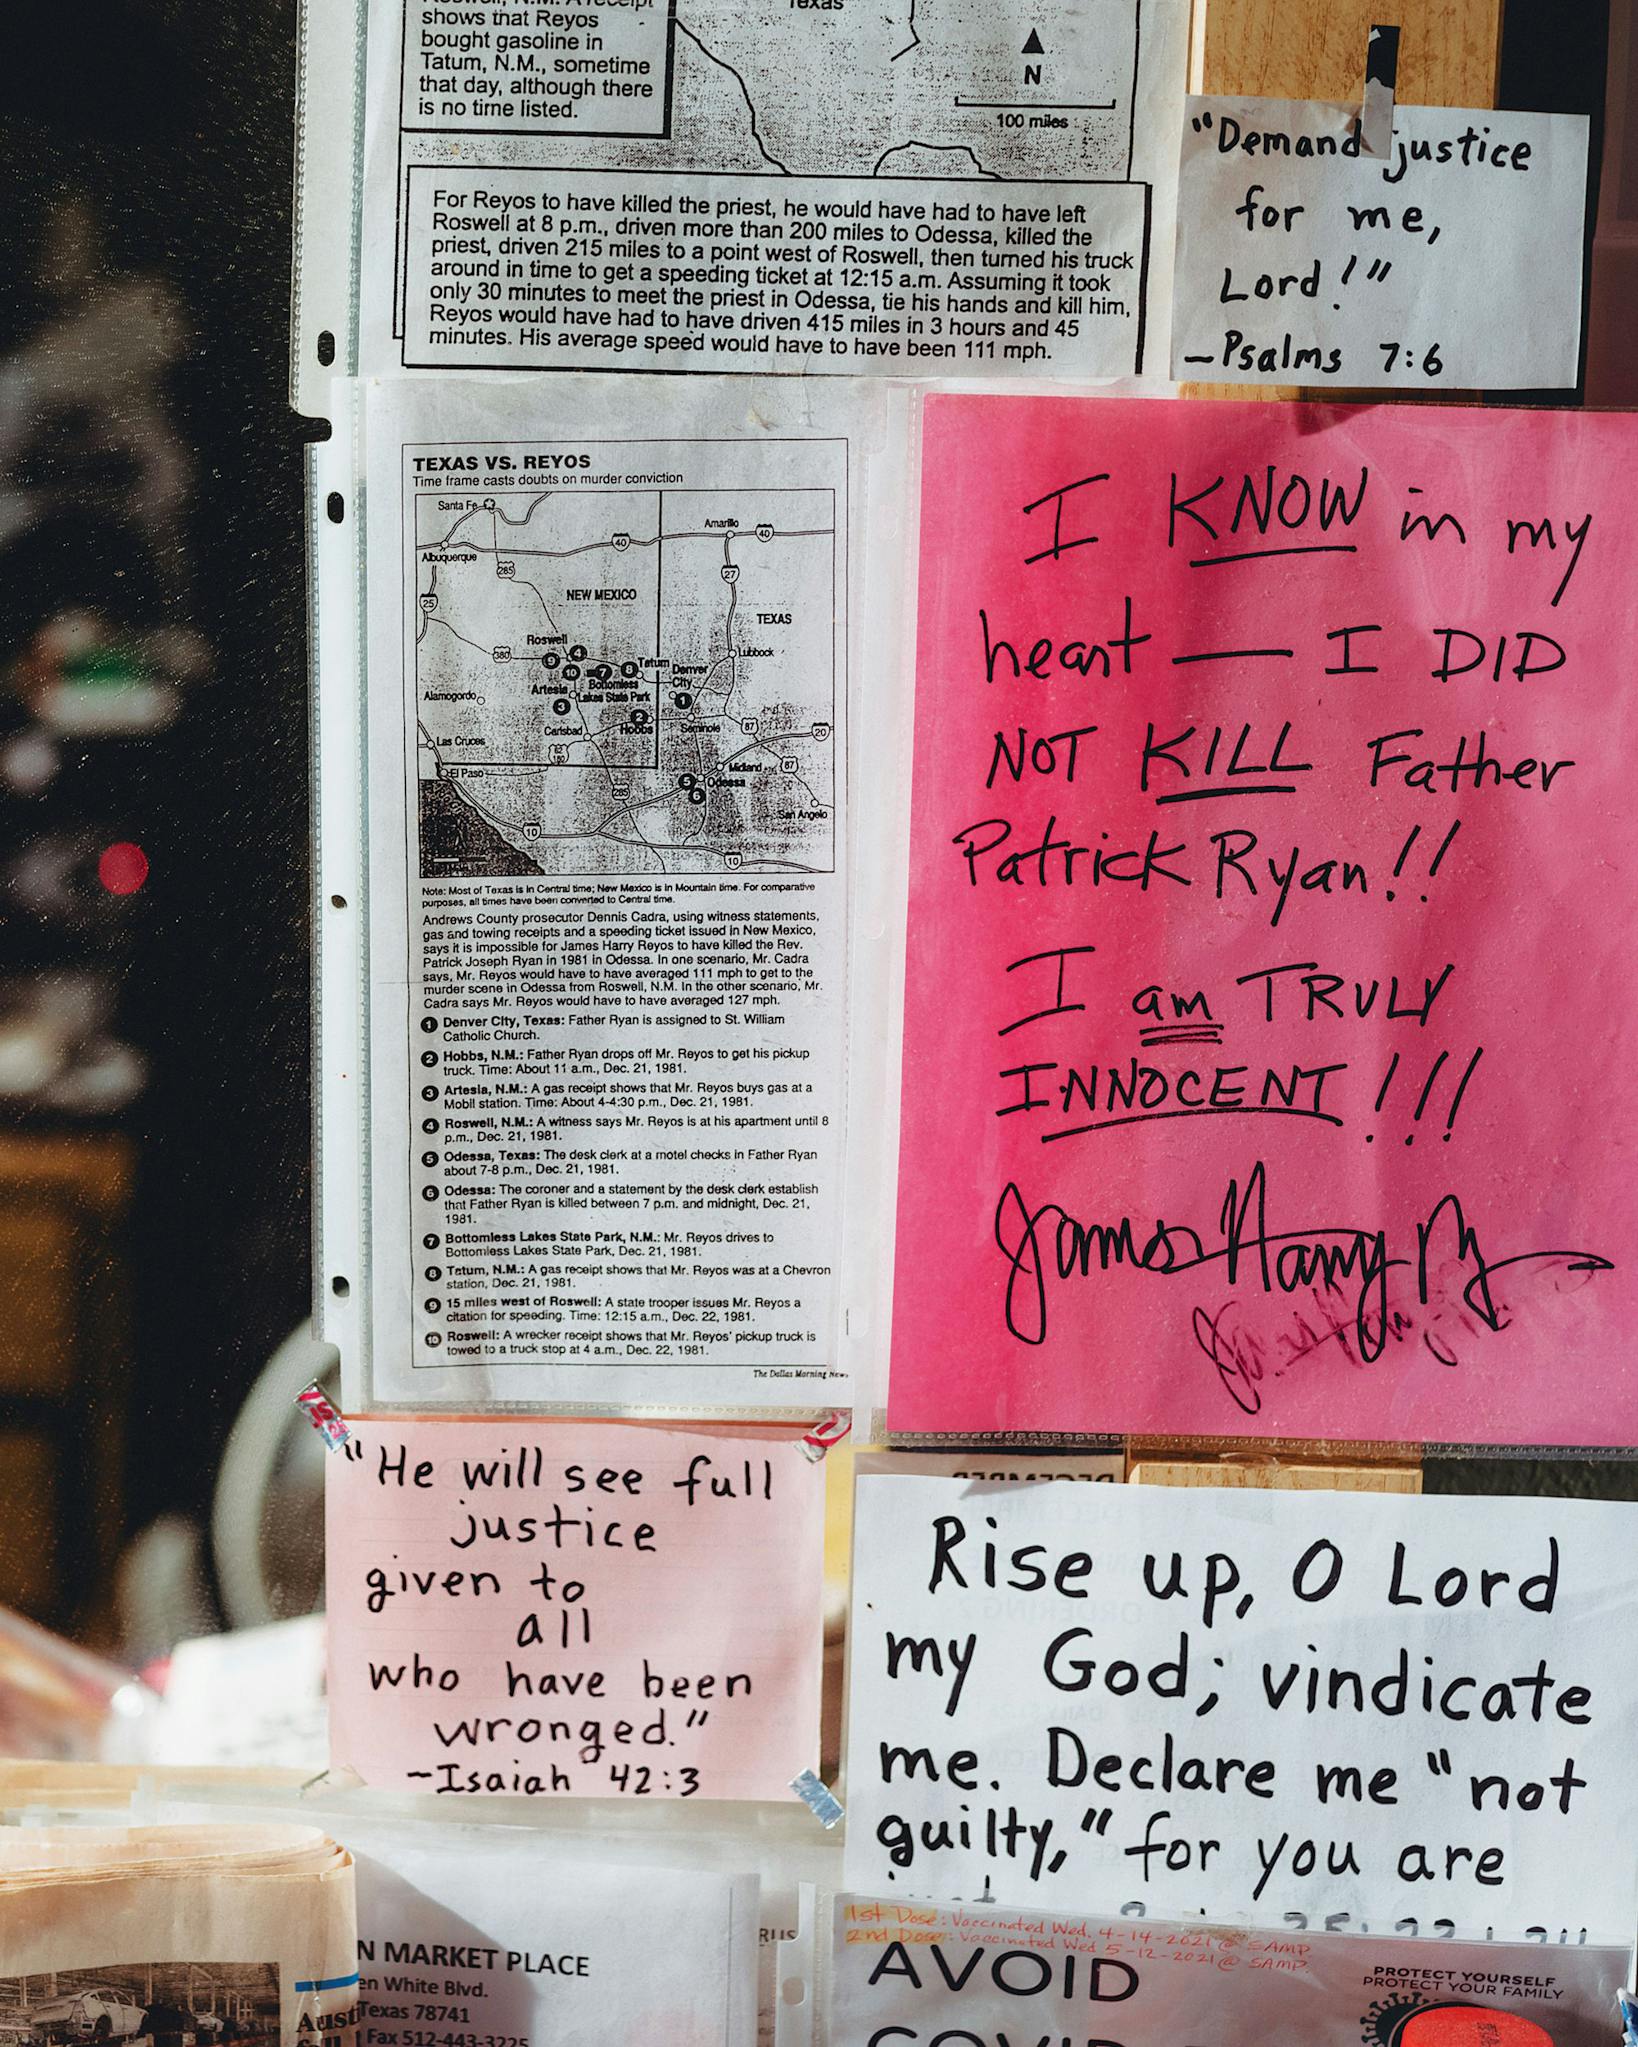 A sign taped to Reyos' mirror reads "I KNOW in my heart—I DID NOT KILL Father Patrick Ryan!! I am TRULY INNOCENT!!!"